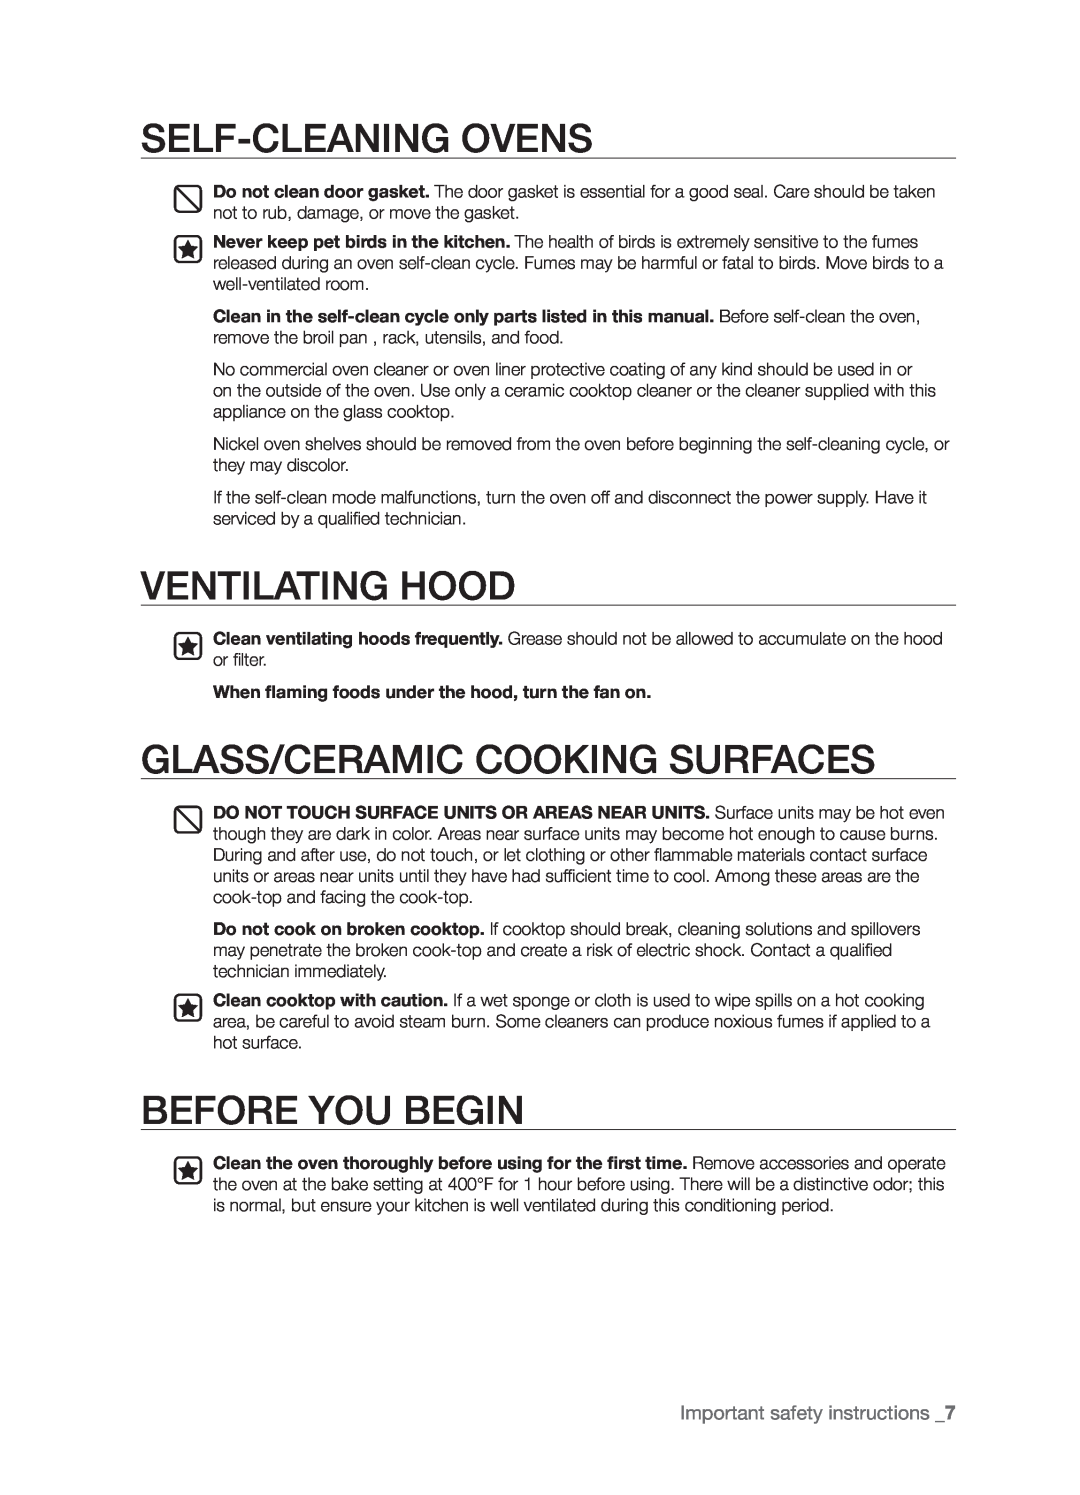 Samsung FTQ386LWX user manual Self-Cleaningovens, Ventilating Hood, Glass/Ceramic Cooking Surfaces, BEFORE you begin 